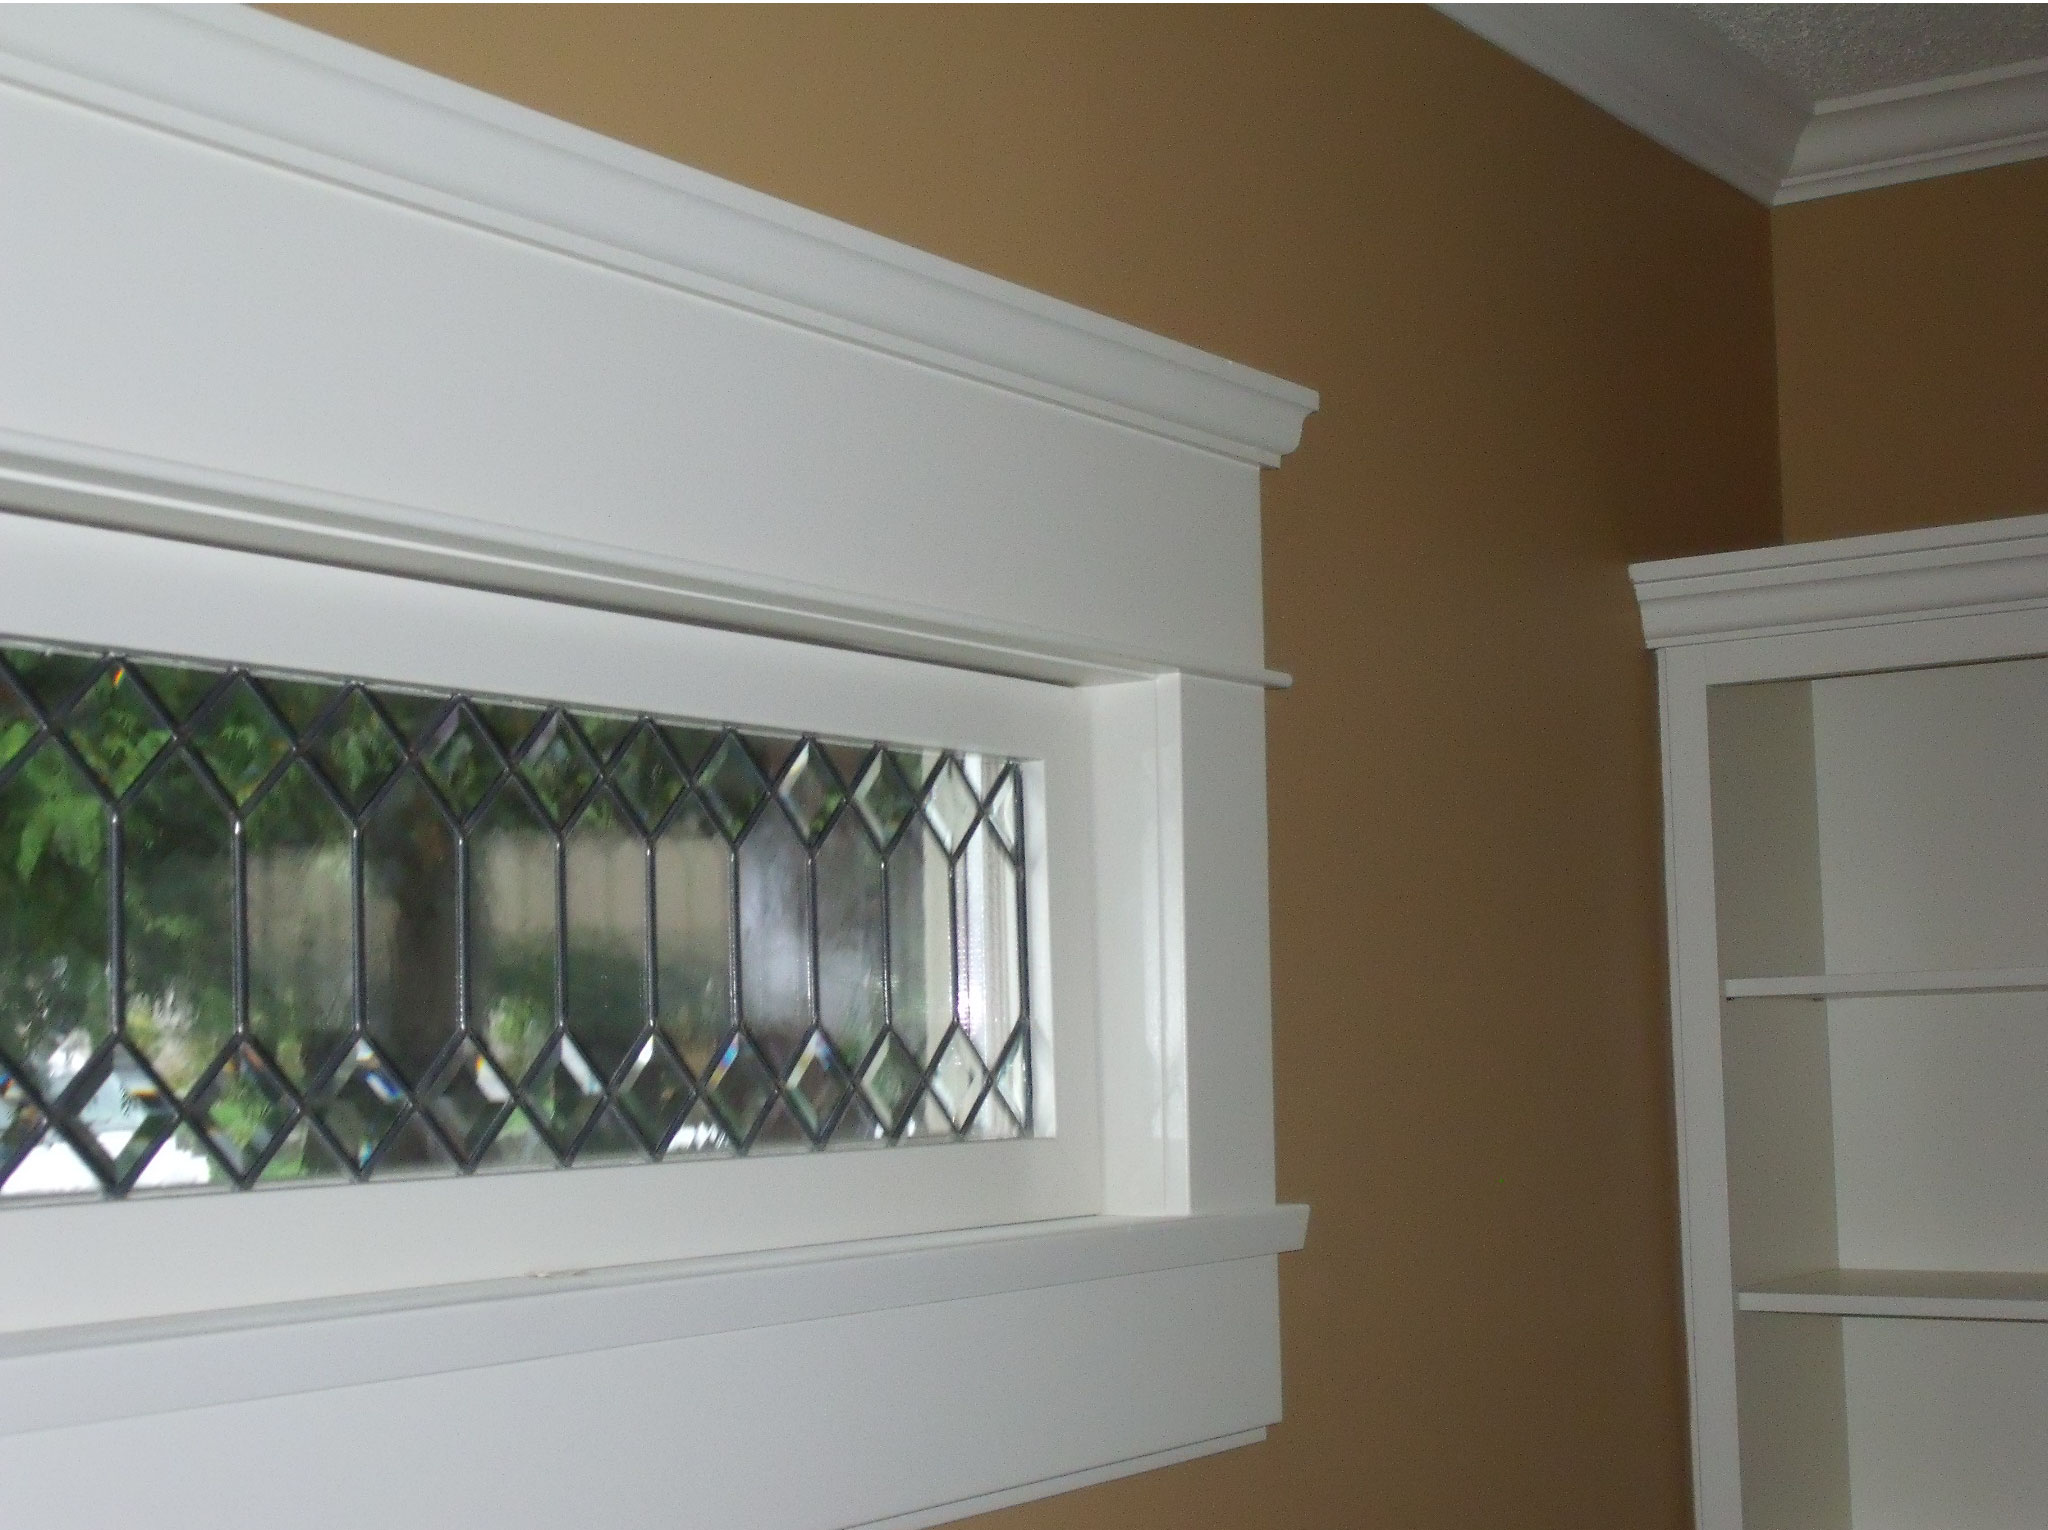 Window with Moulding